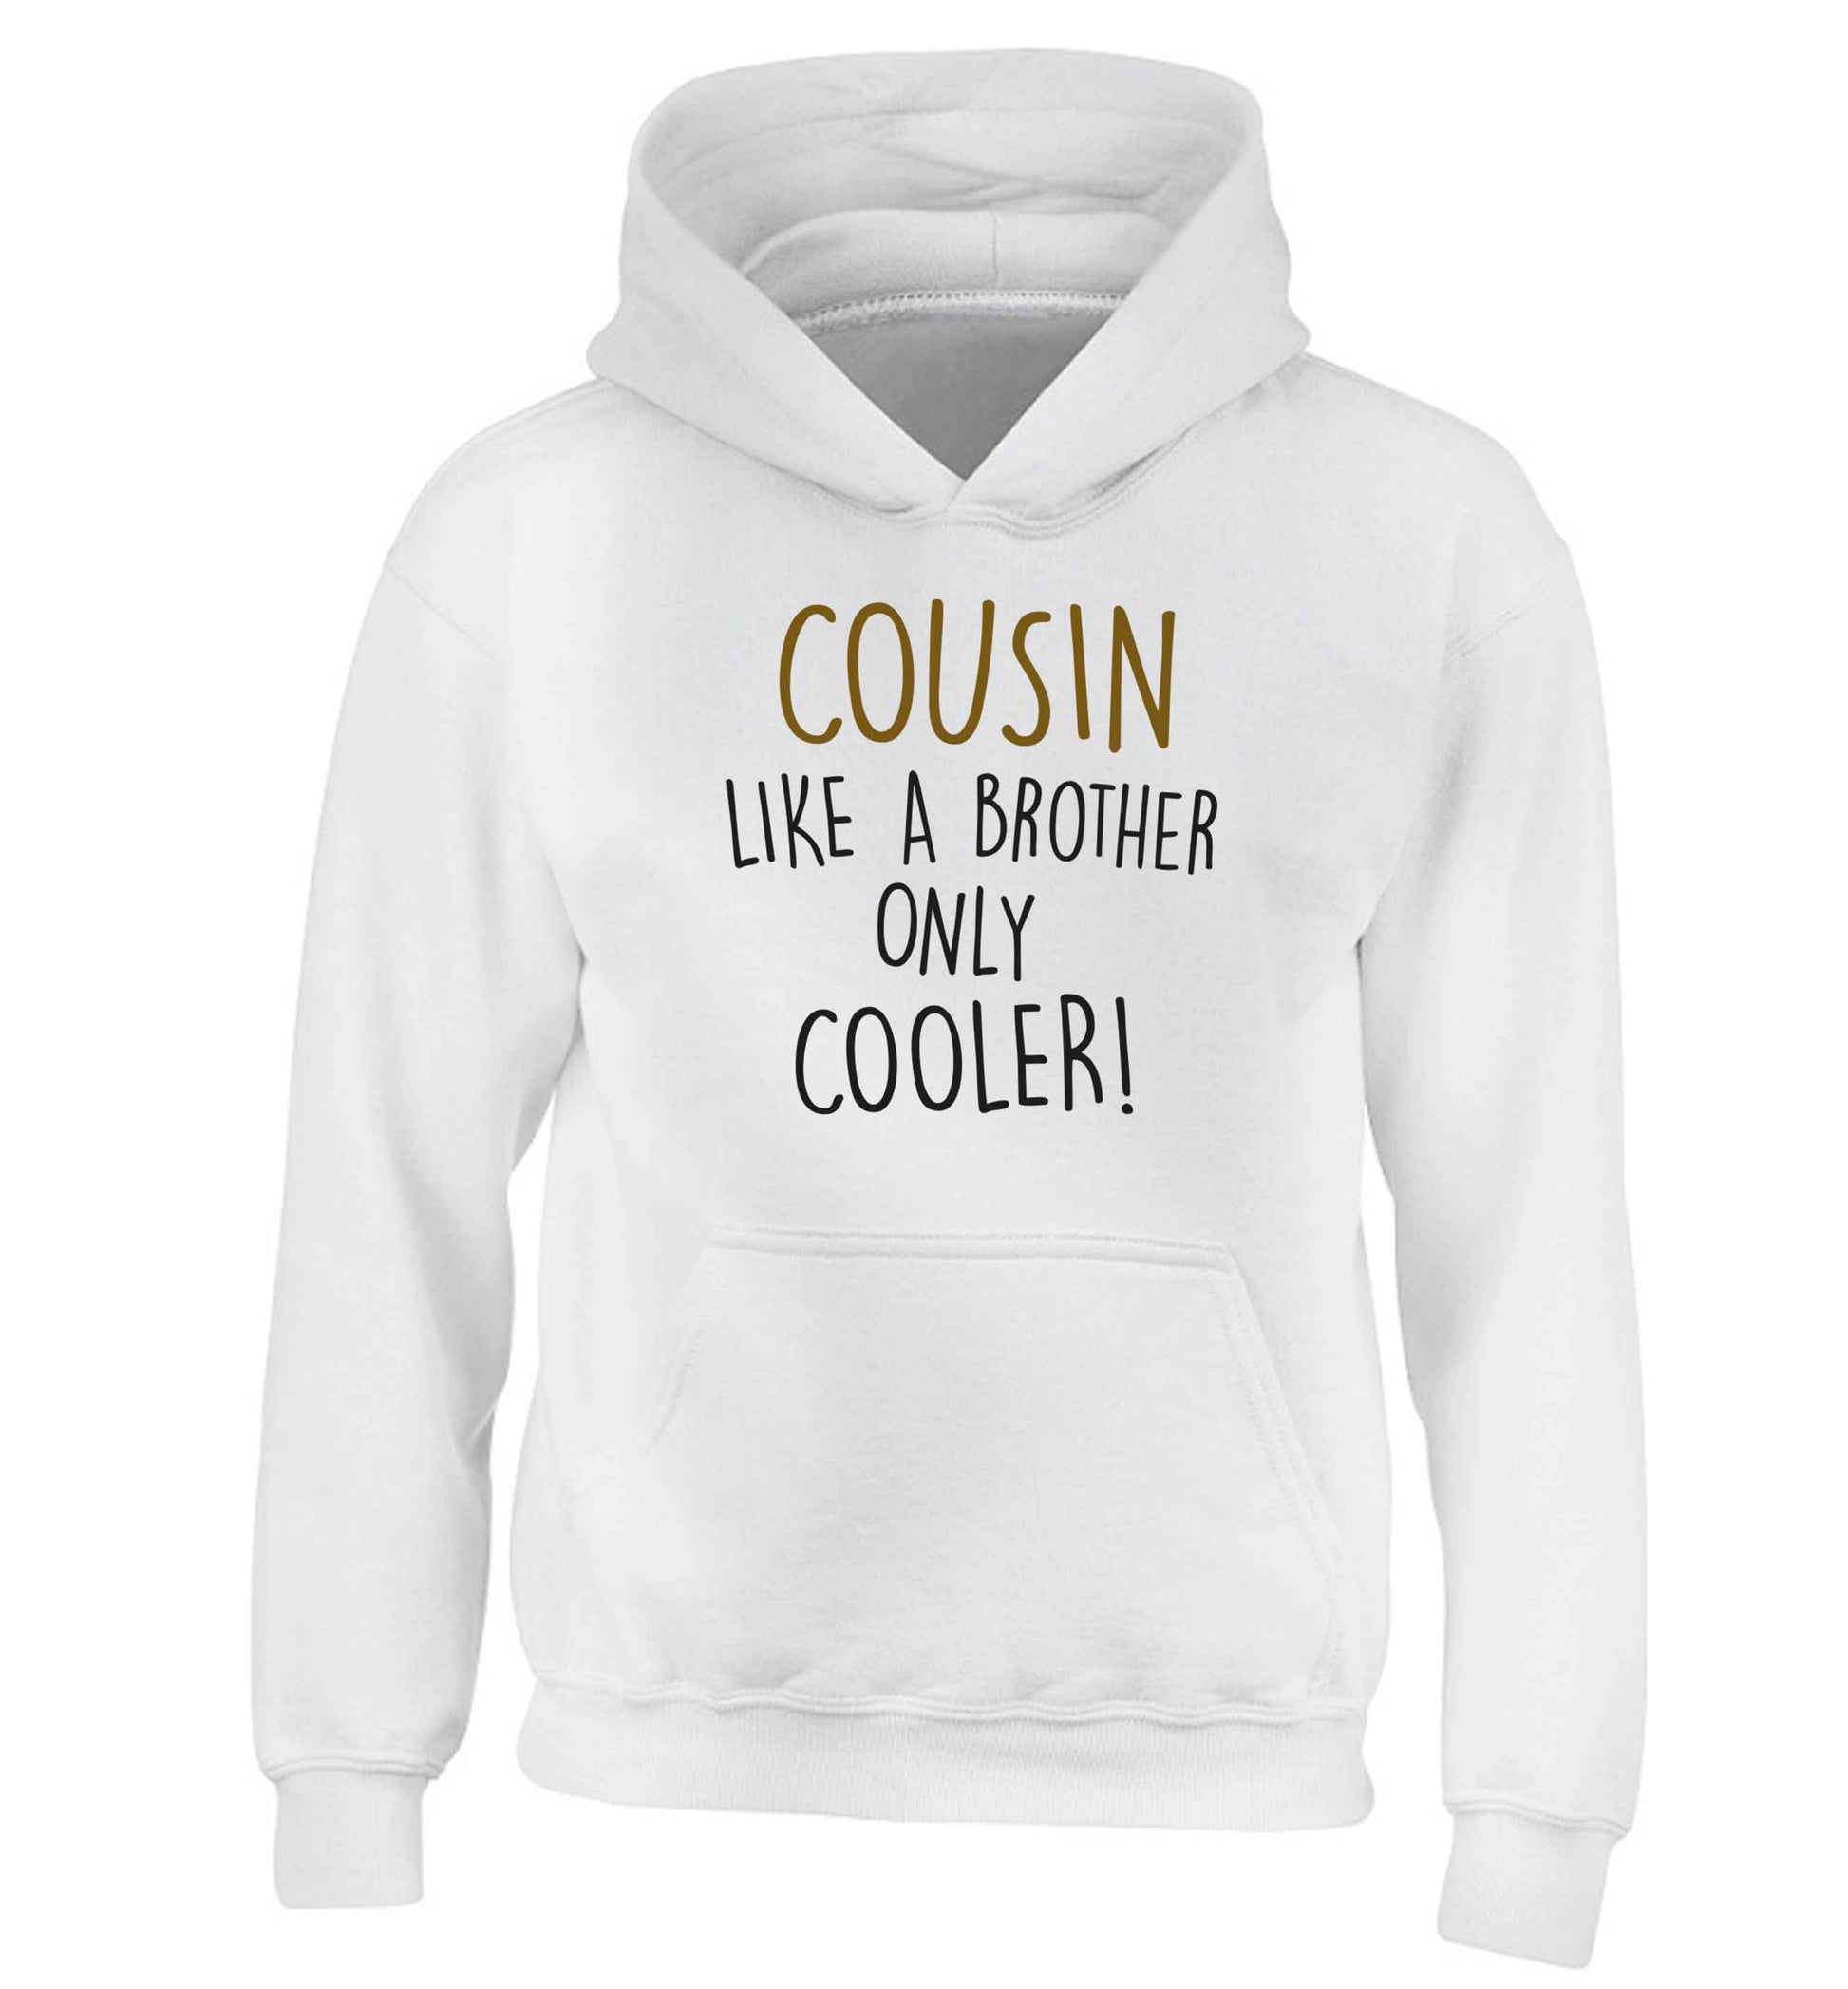 Cousin like a brother only cooler children's white hoodie 12-13 Years